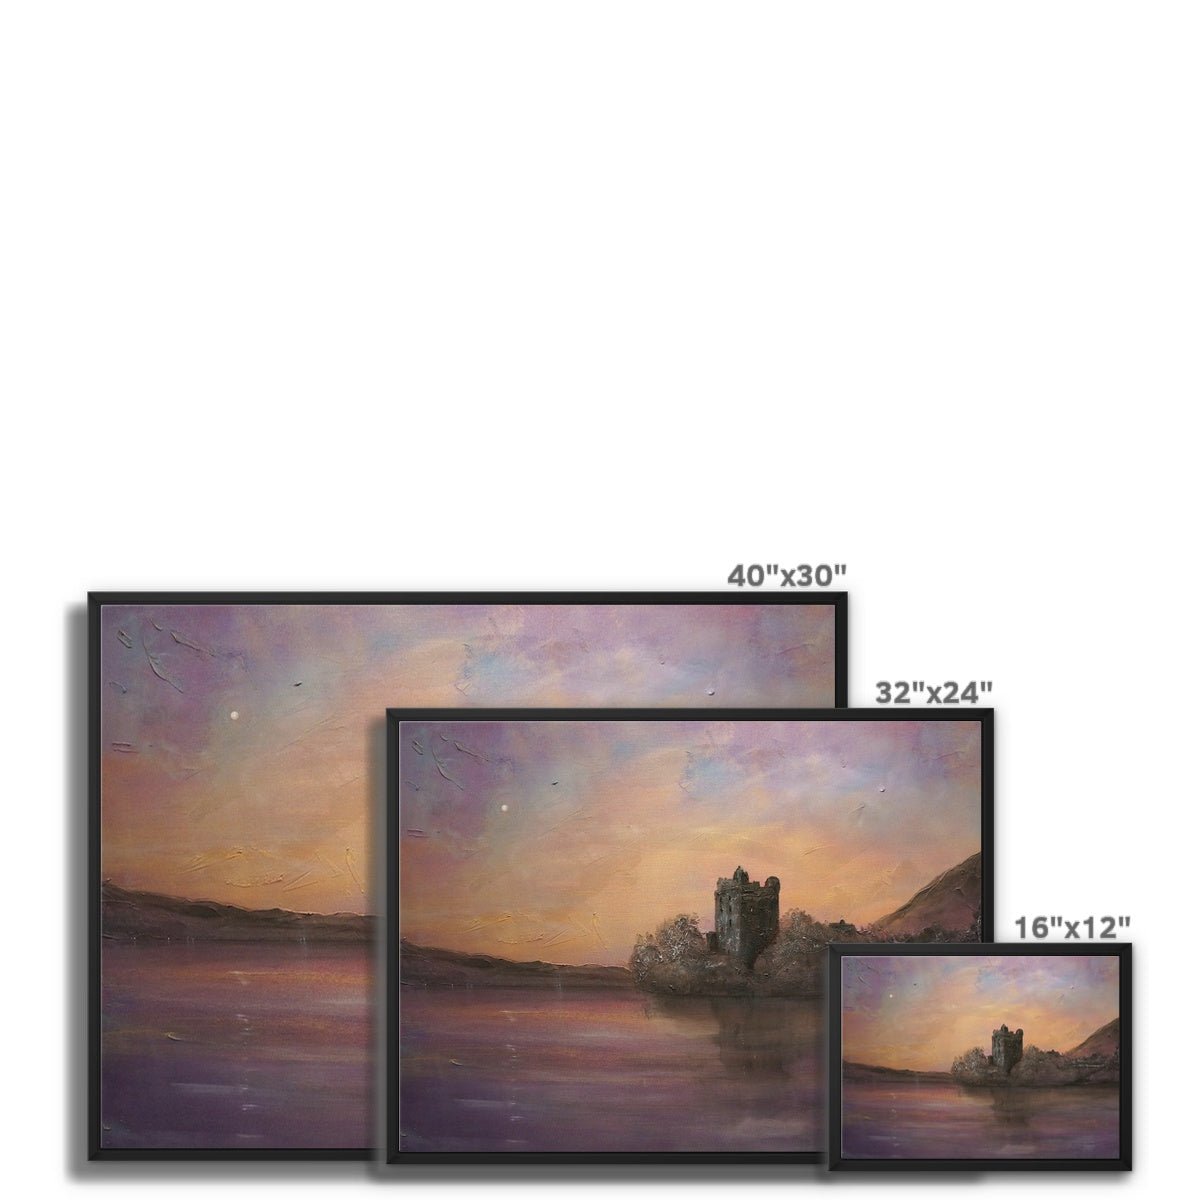 Urquhart Castle Moonlight Painting | Framed Canvas From Scotland-Floating Framed Canvas Prints-Historic & Iconic Scotland Art Gallery-Paintings, Prints, Homeware, Art Gifts From Scotland By Scottish Artist Kevin Hunter